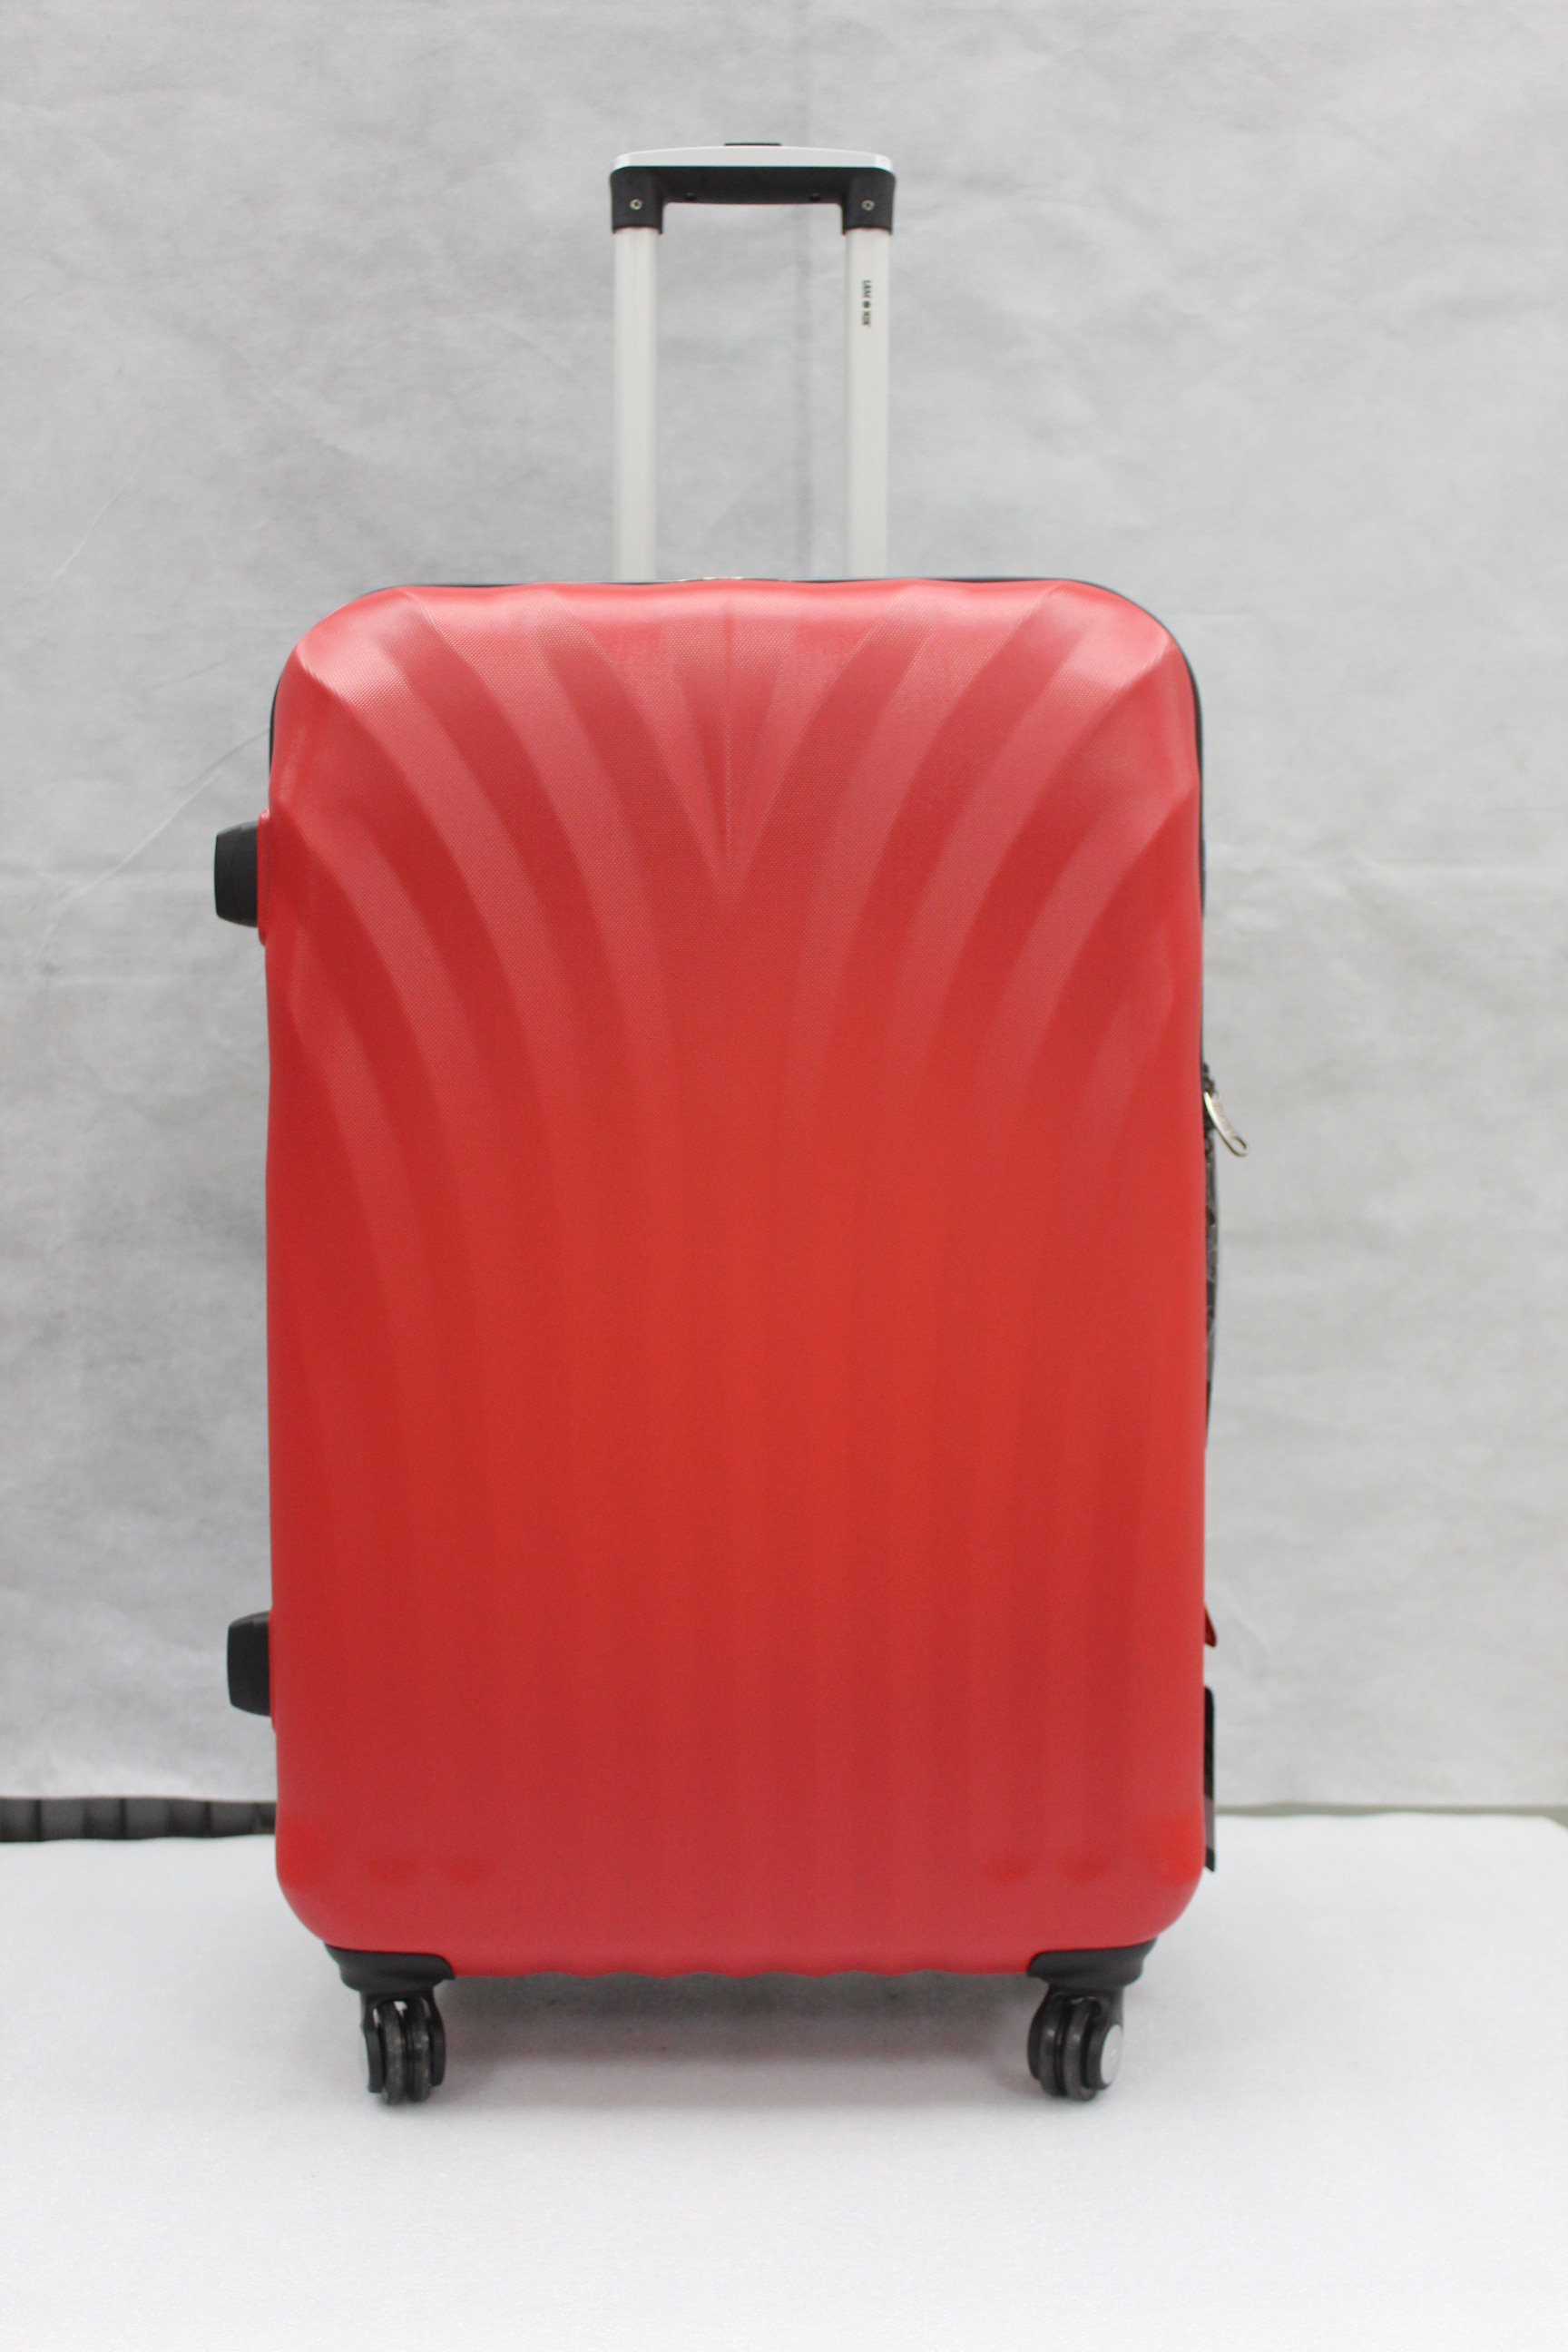 yanteng fashion spinner luggage with creative design